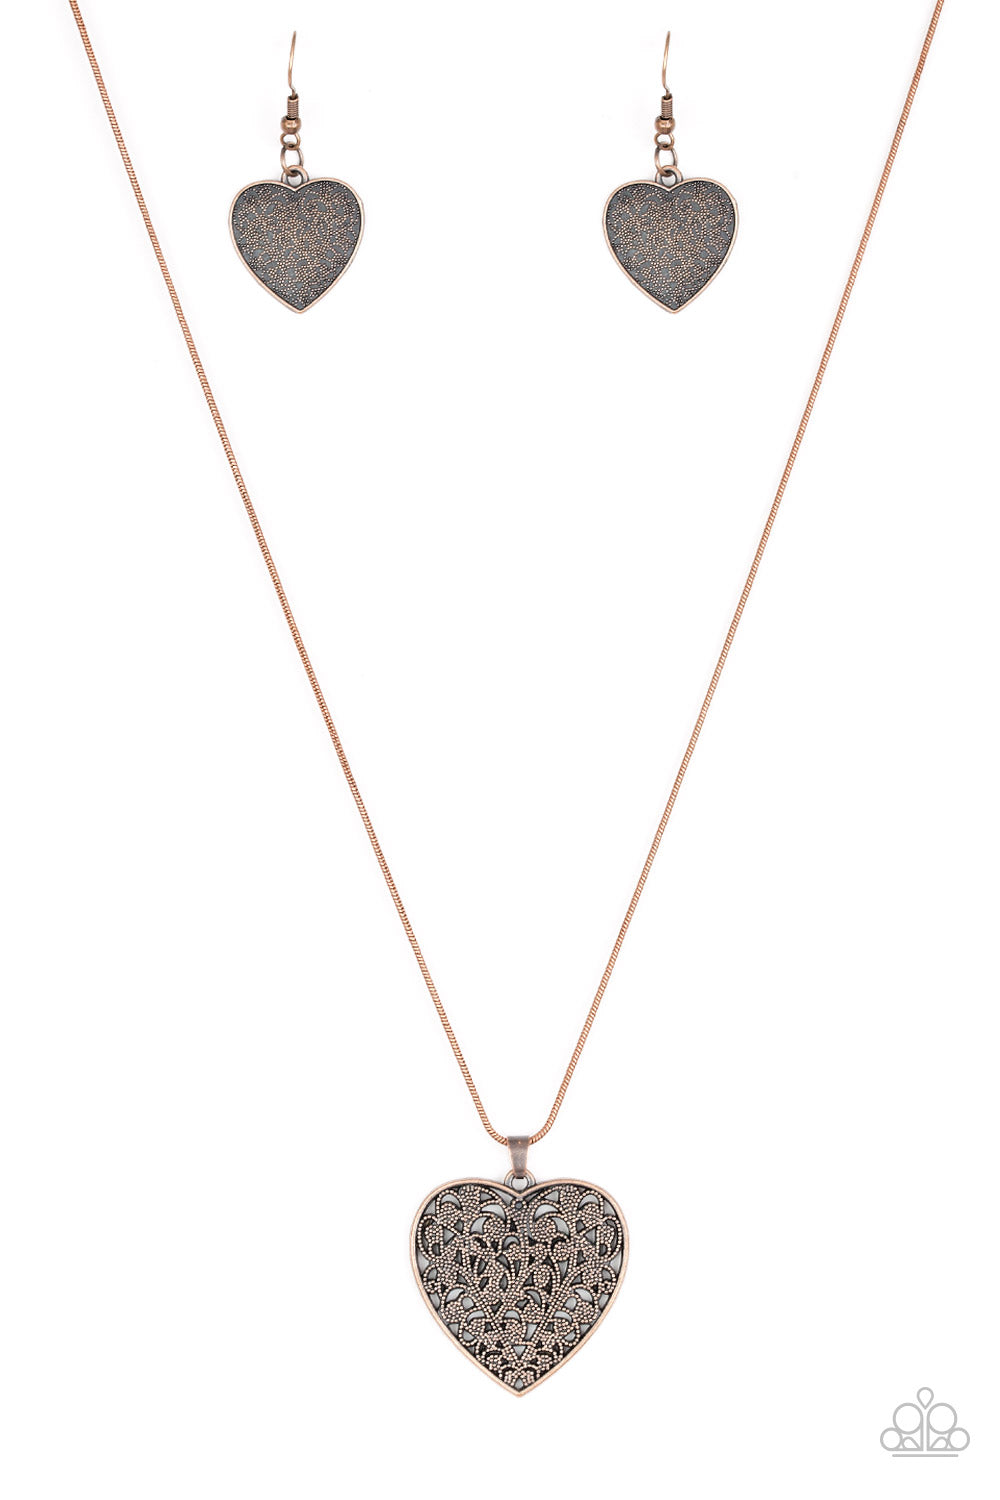 Look Into Your Heart - copper - Paparazzi necklace